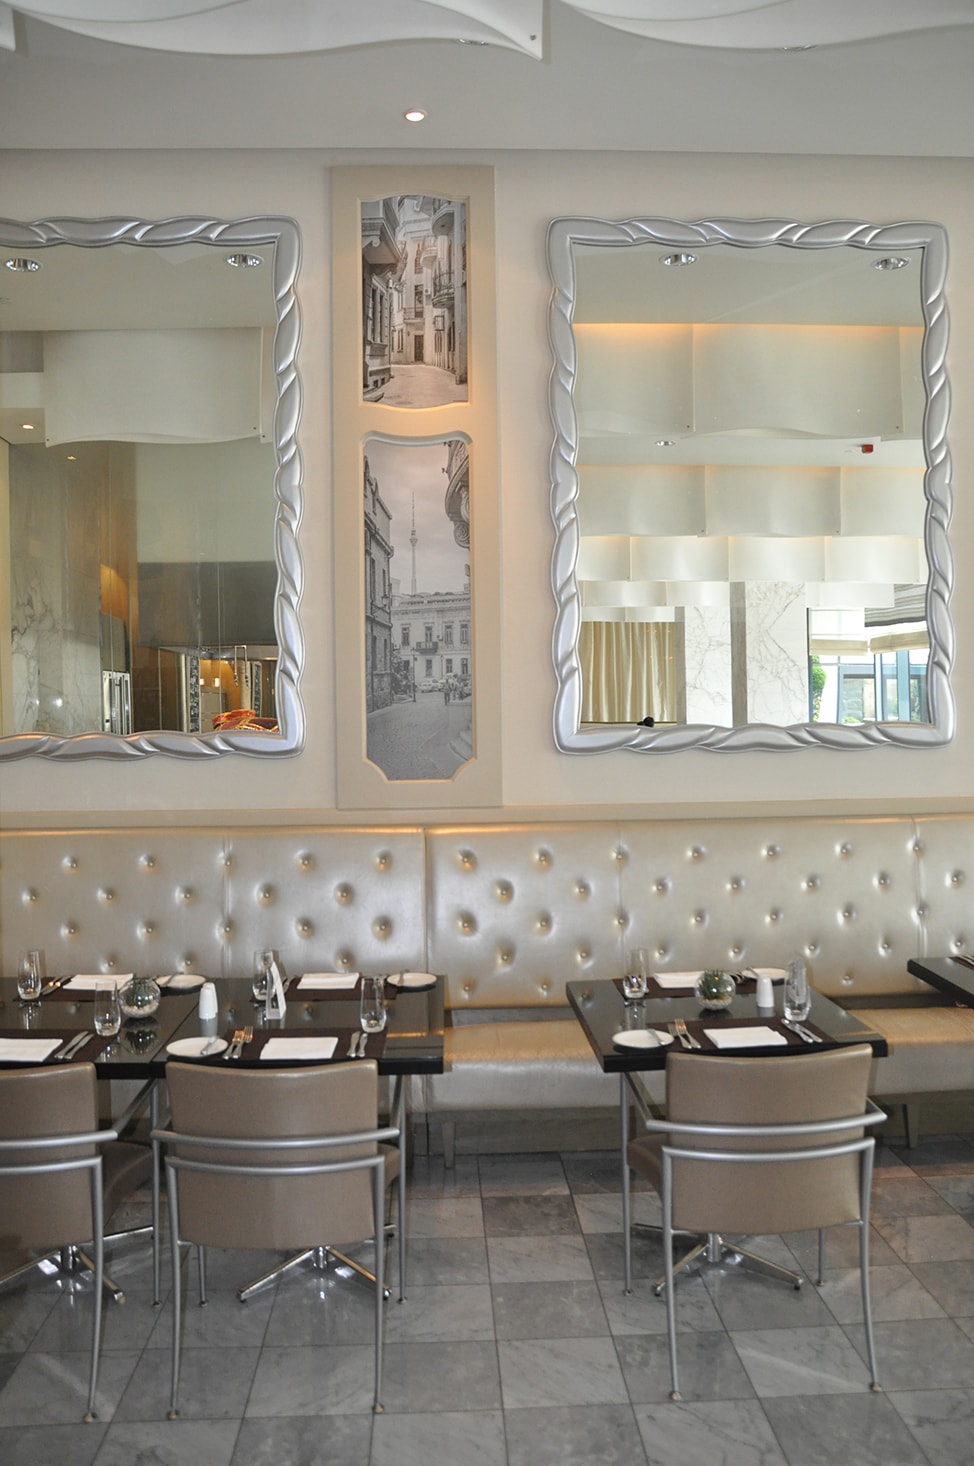 Large silver framed mirrors line the walls above a banquet sitting area at Le Bistro